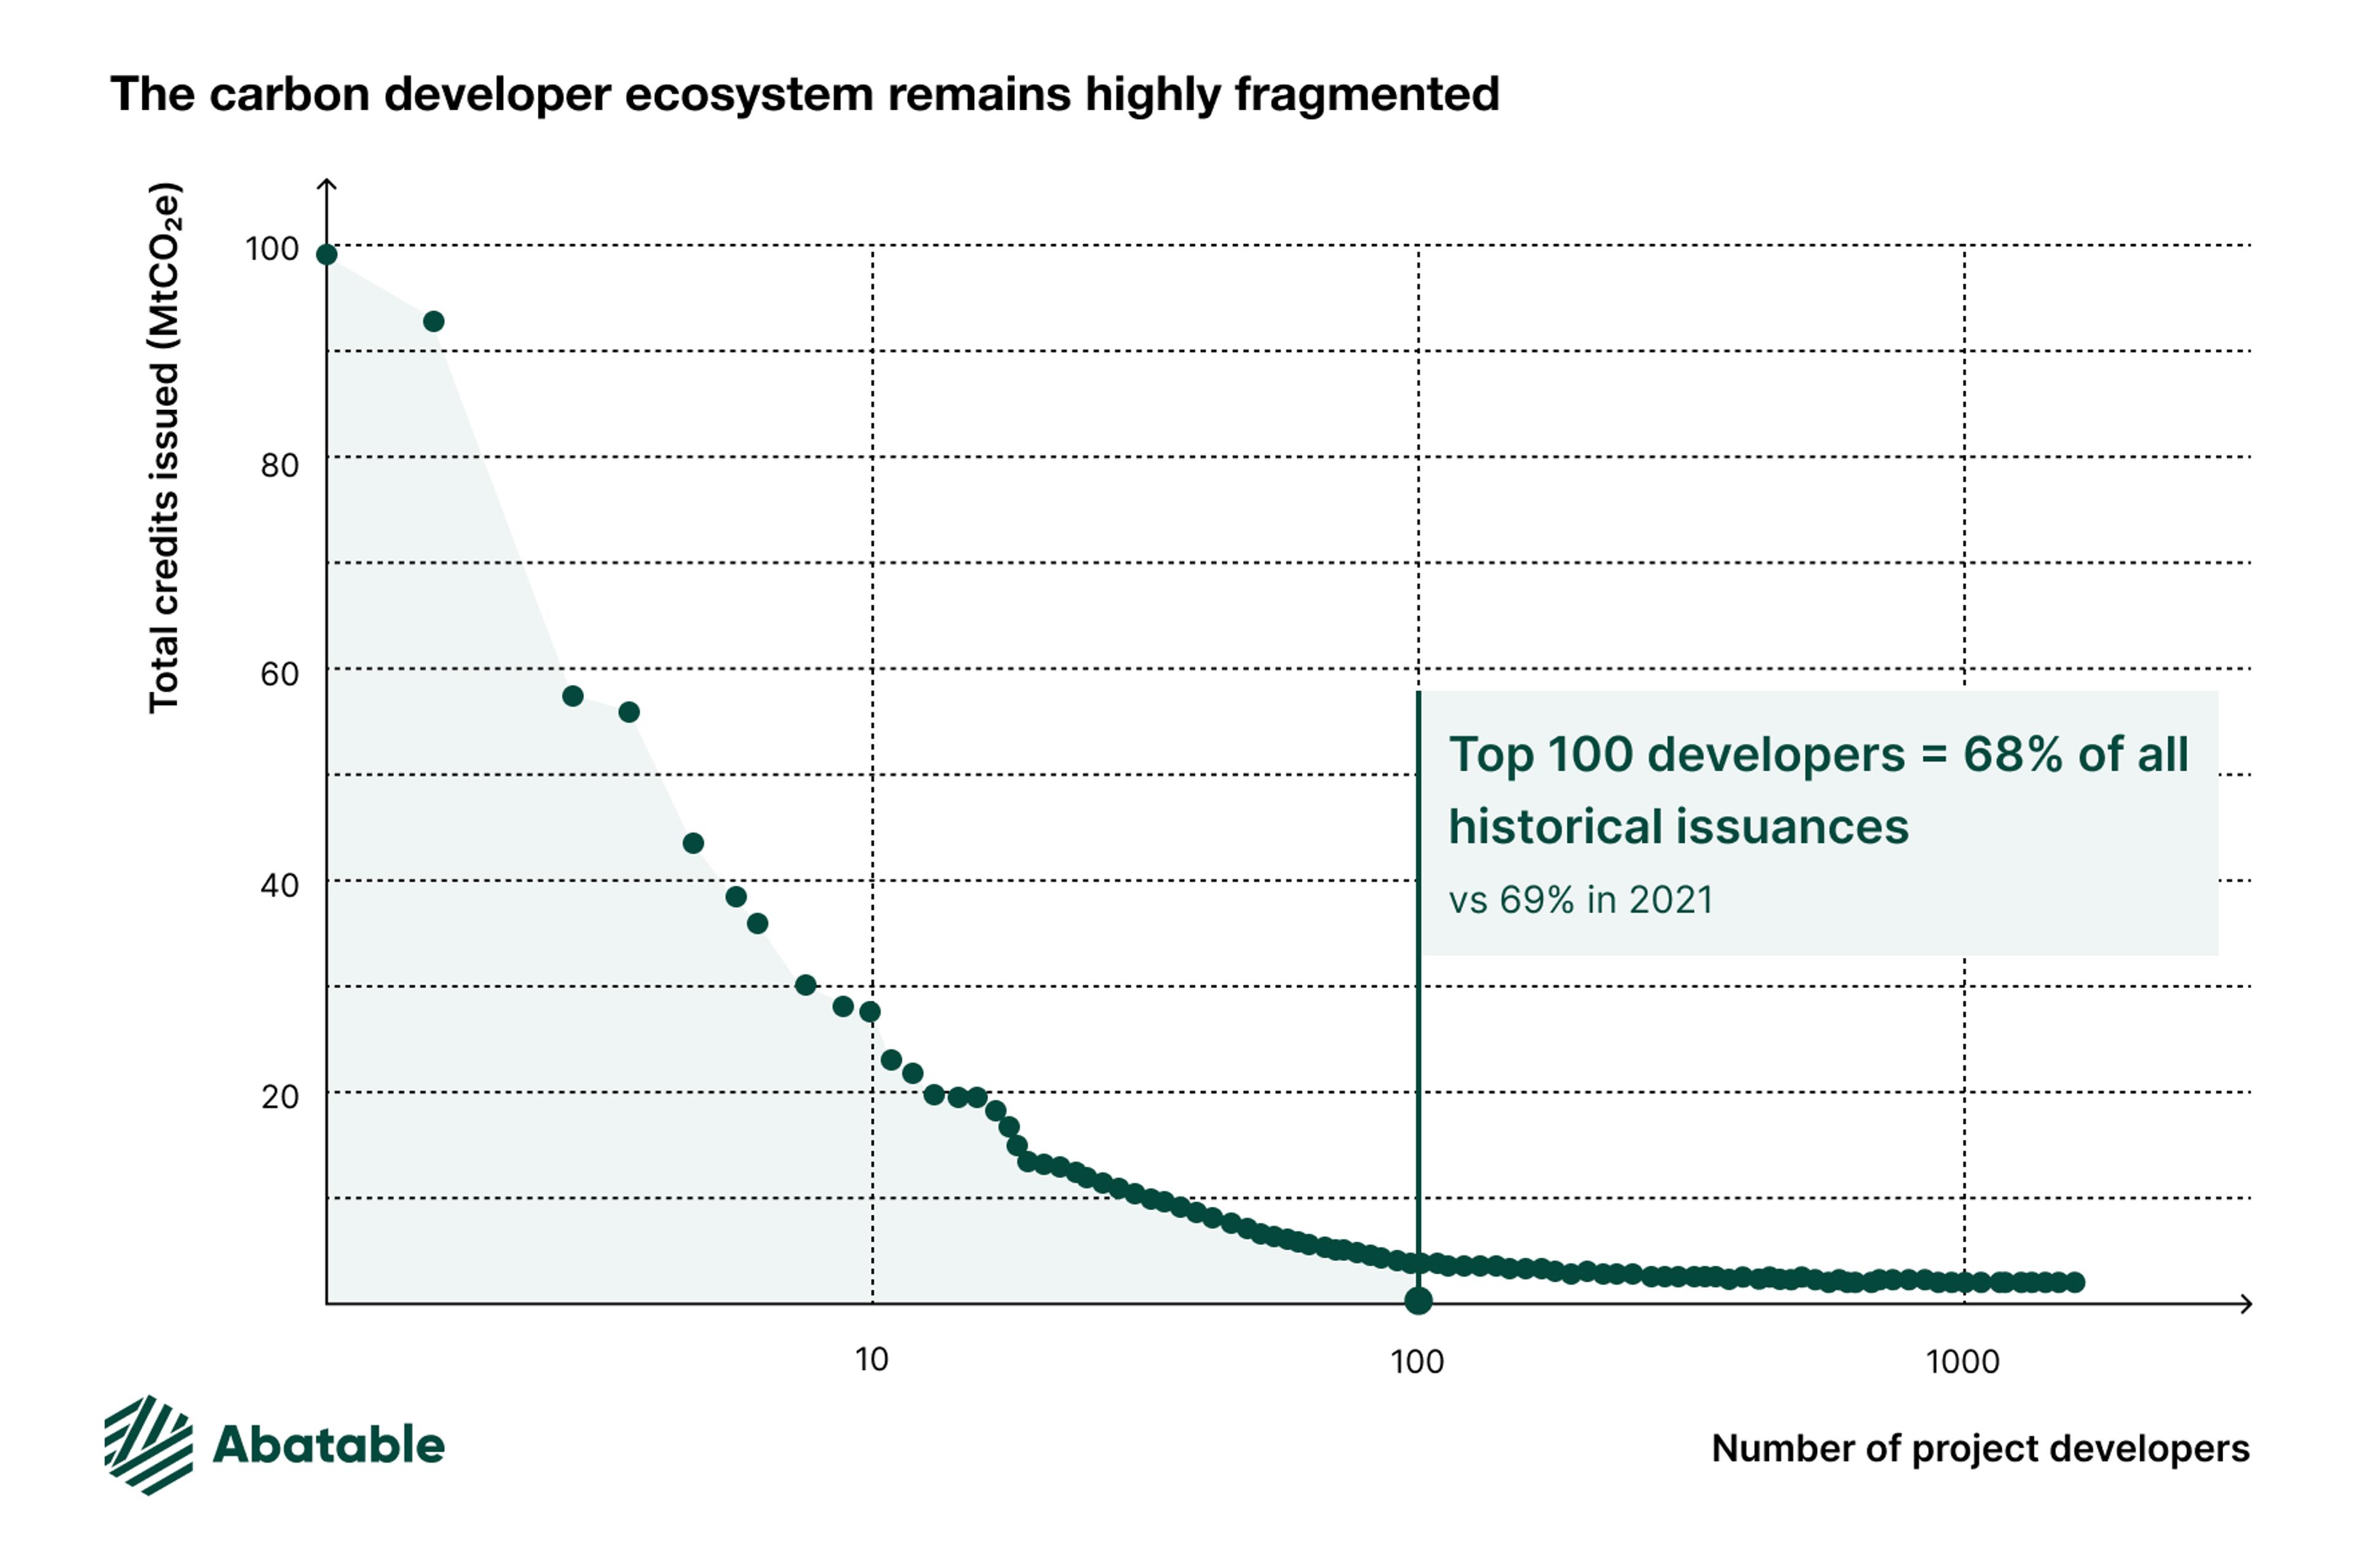 The carbon developer ecosystem remains highly fragmented